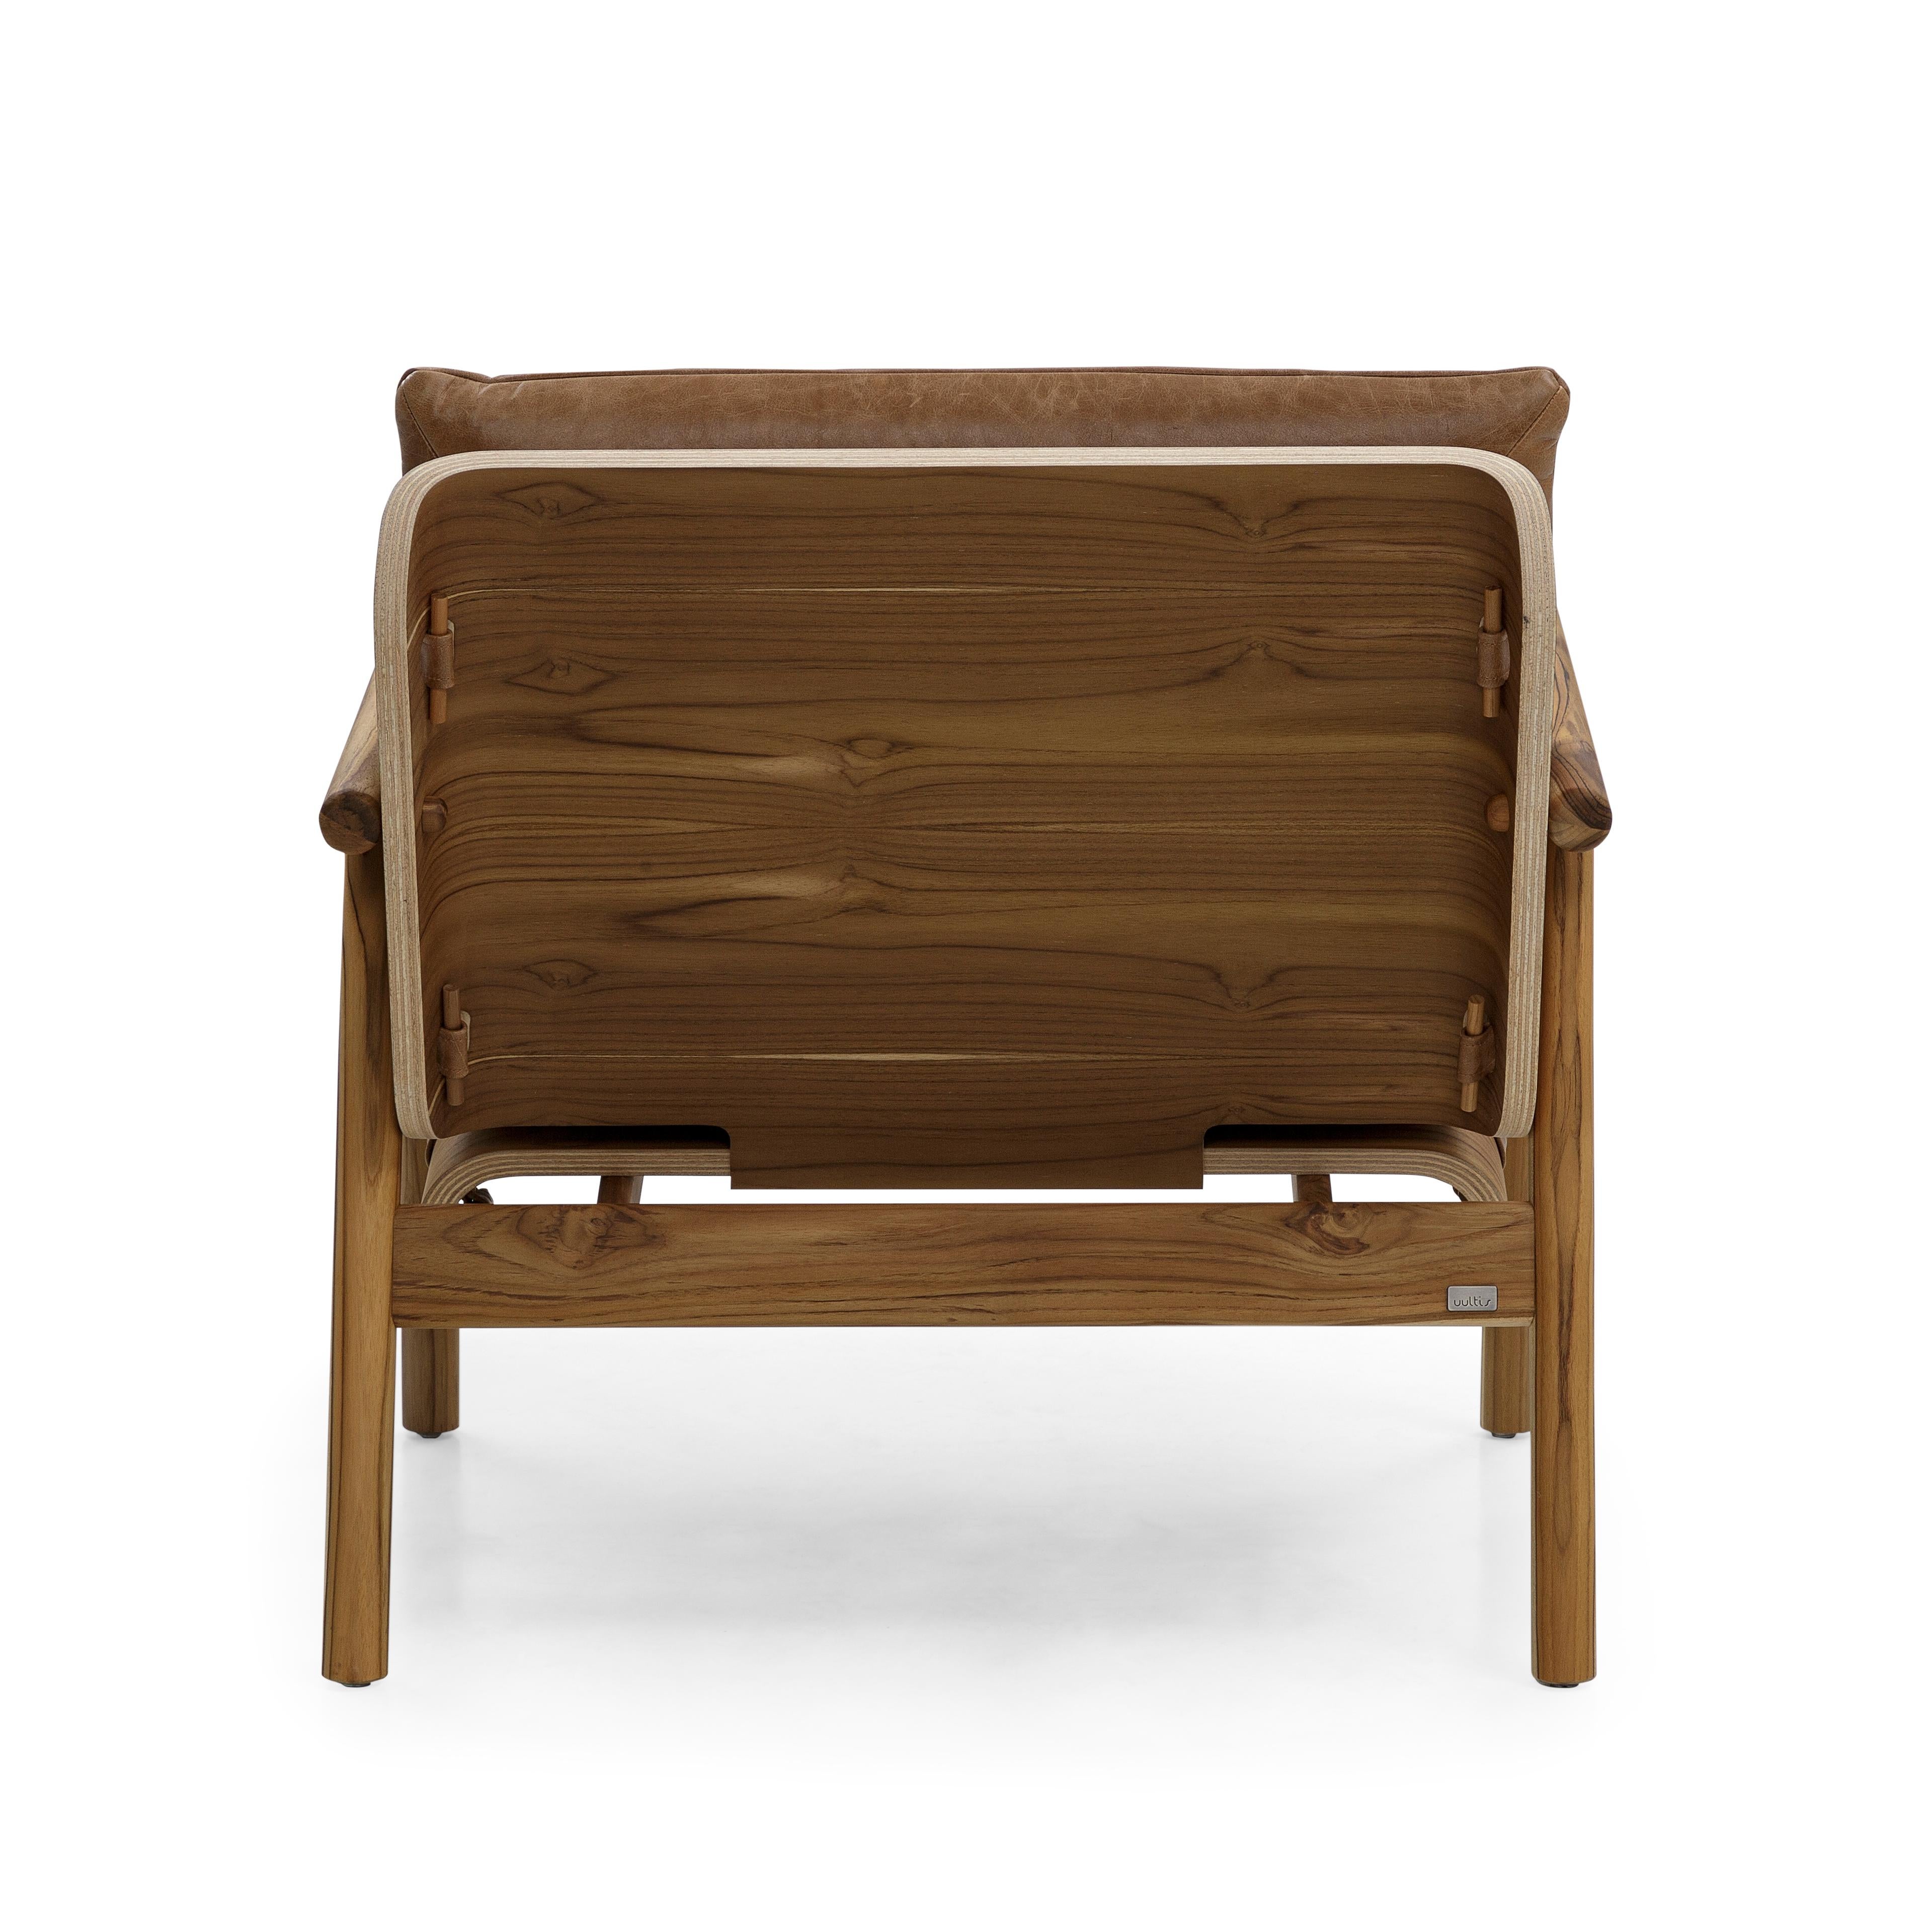 Tai Armchair in Teak Wood Finish with Brown Leather Cushions In New Condition For Sale In Miami, FL